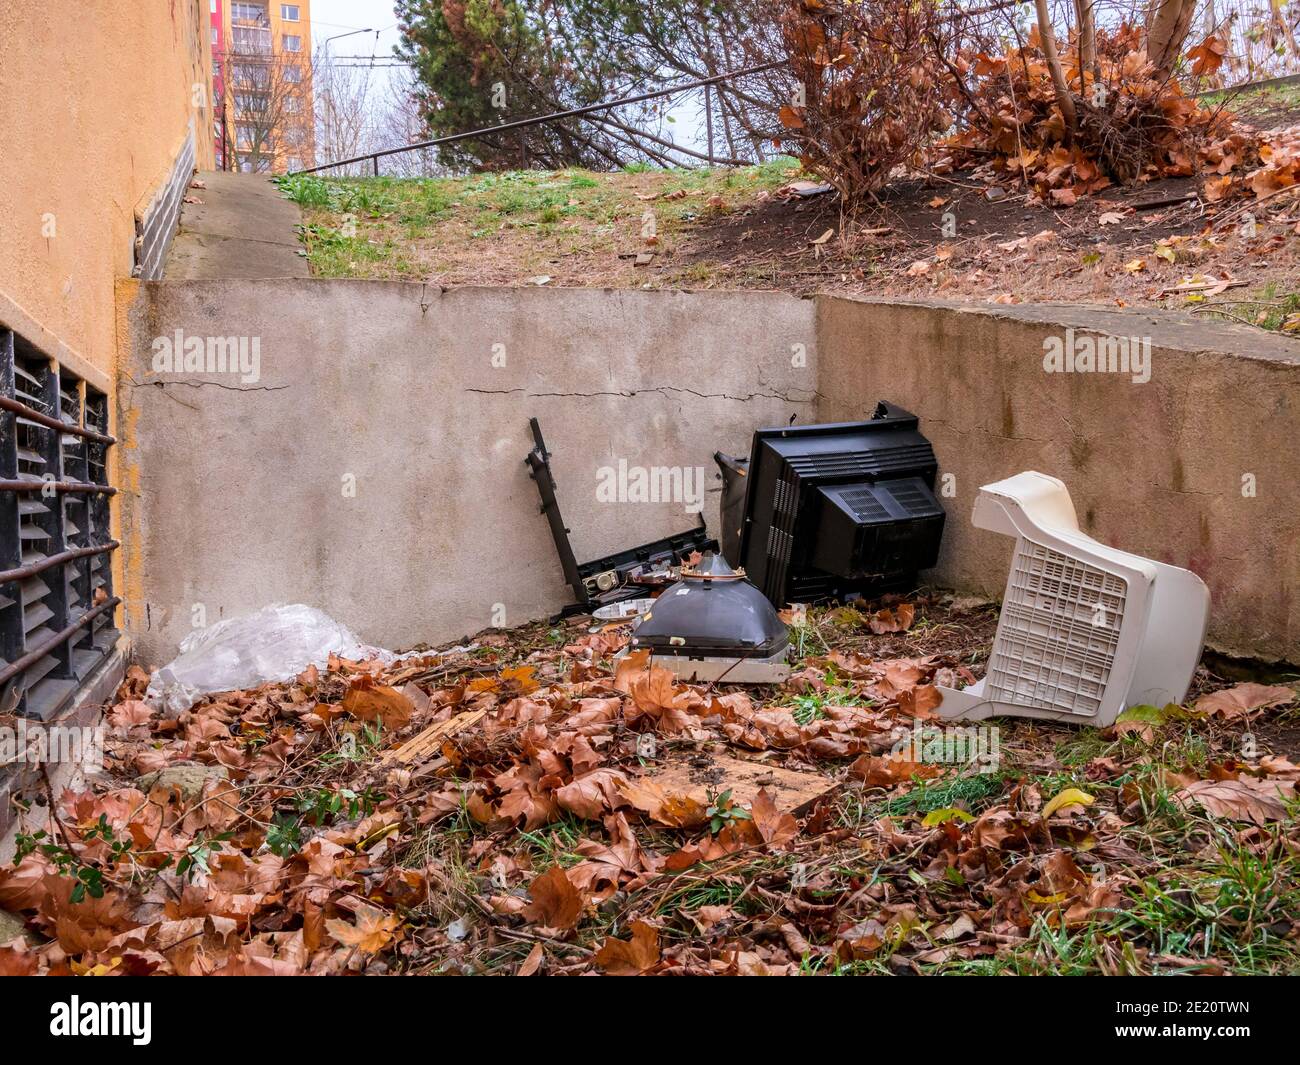 Old CRT computer and TV monitors smashed to pieces in dark corner of populated area. Stock Photo